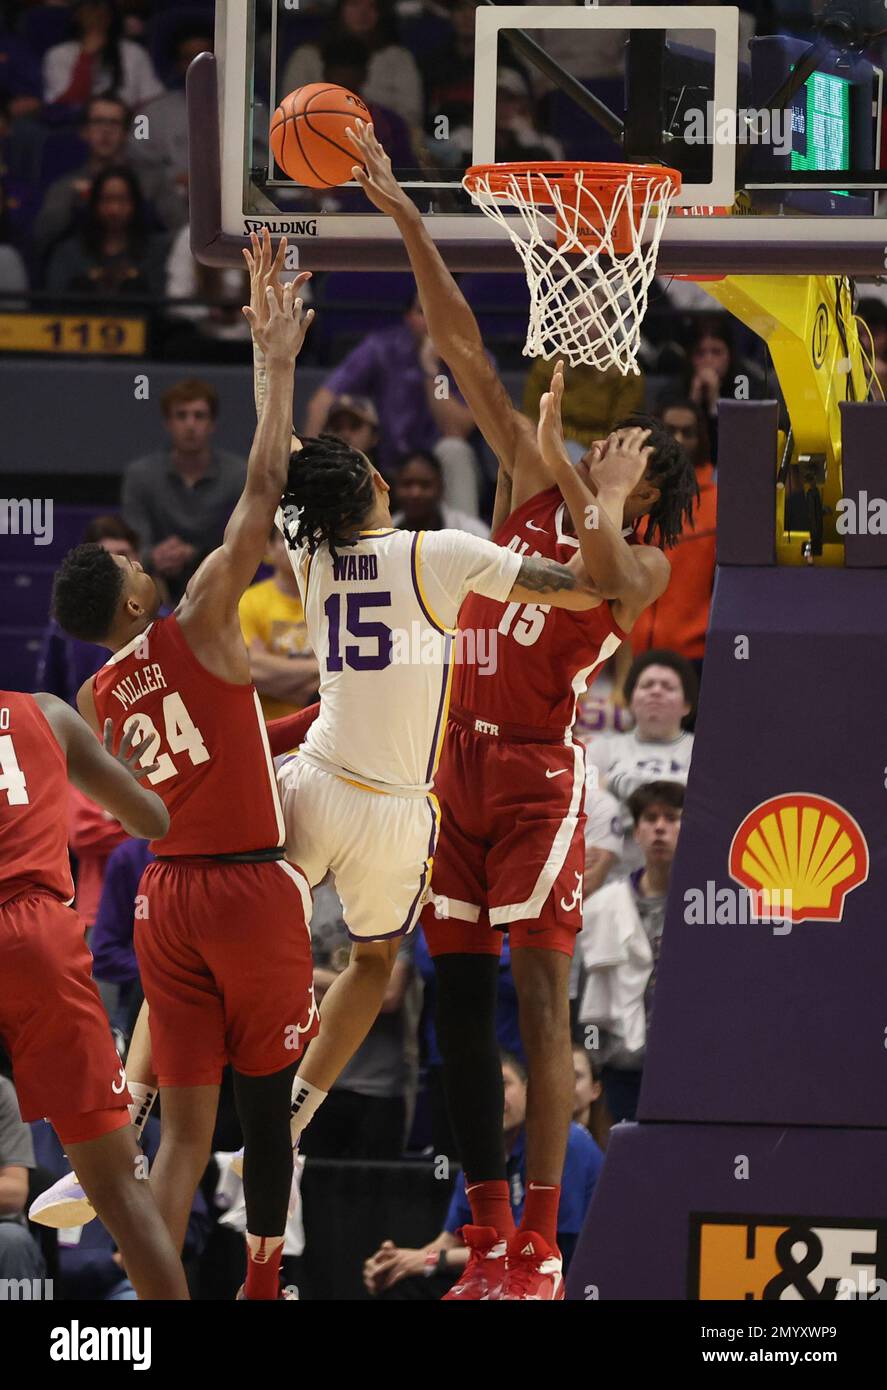 Baton Rouge, USA. 04th Feb, 2023. Alabama Crimson Tide forward Noah Clowney (15) blocks LSU Tigers forward Tyrell Ward (15) shot during a men's college basketball game at the Pete Maravich Assembly Center in Baton Rouge, Louisiana on Saturday, February 4, 2023. (Photo by Peter G. Forest/Sipa USA) Credit: Sipa USA/Alamy Live News Stock Photo